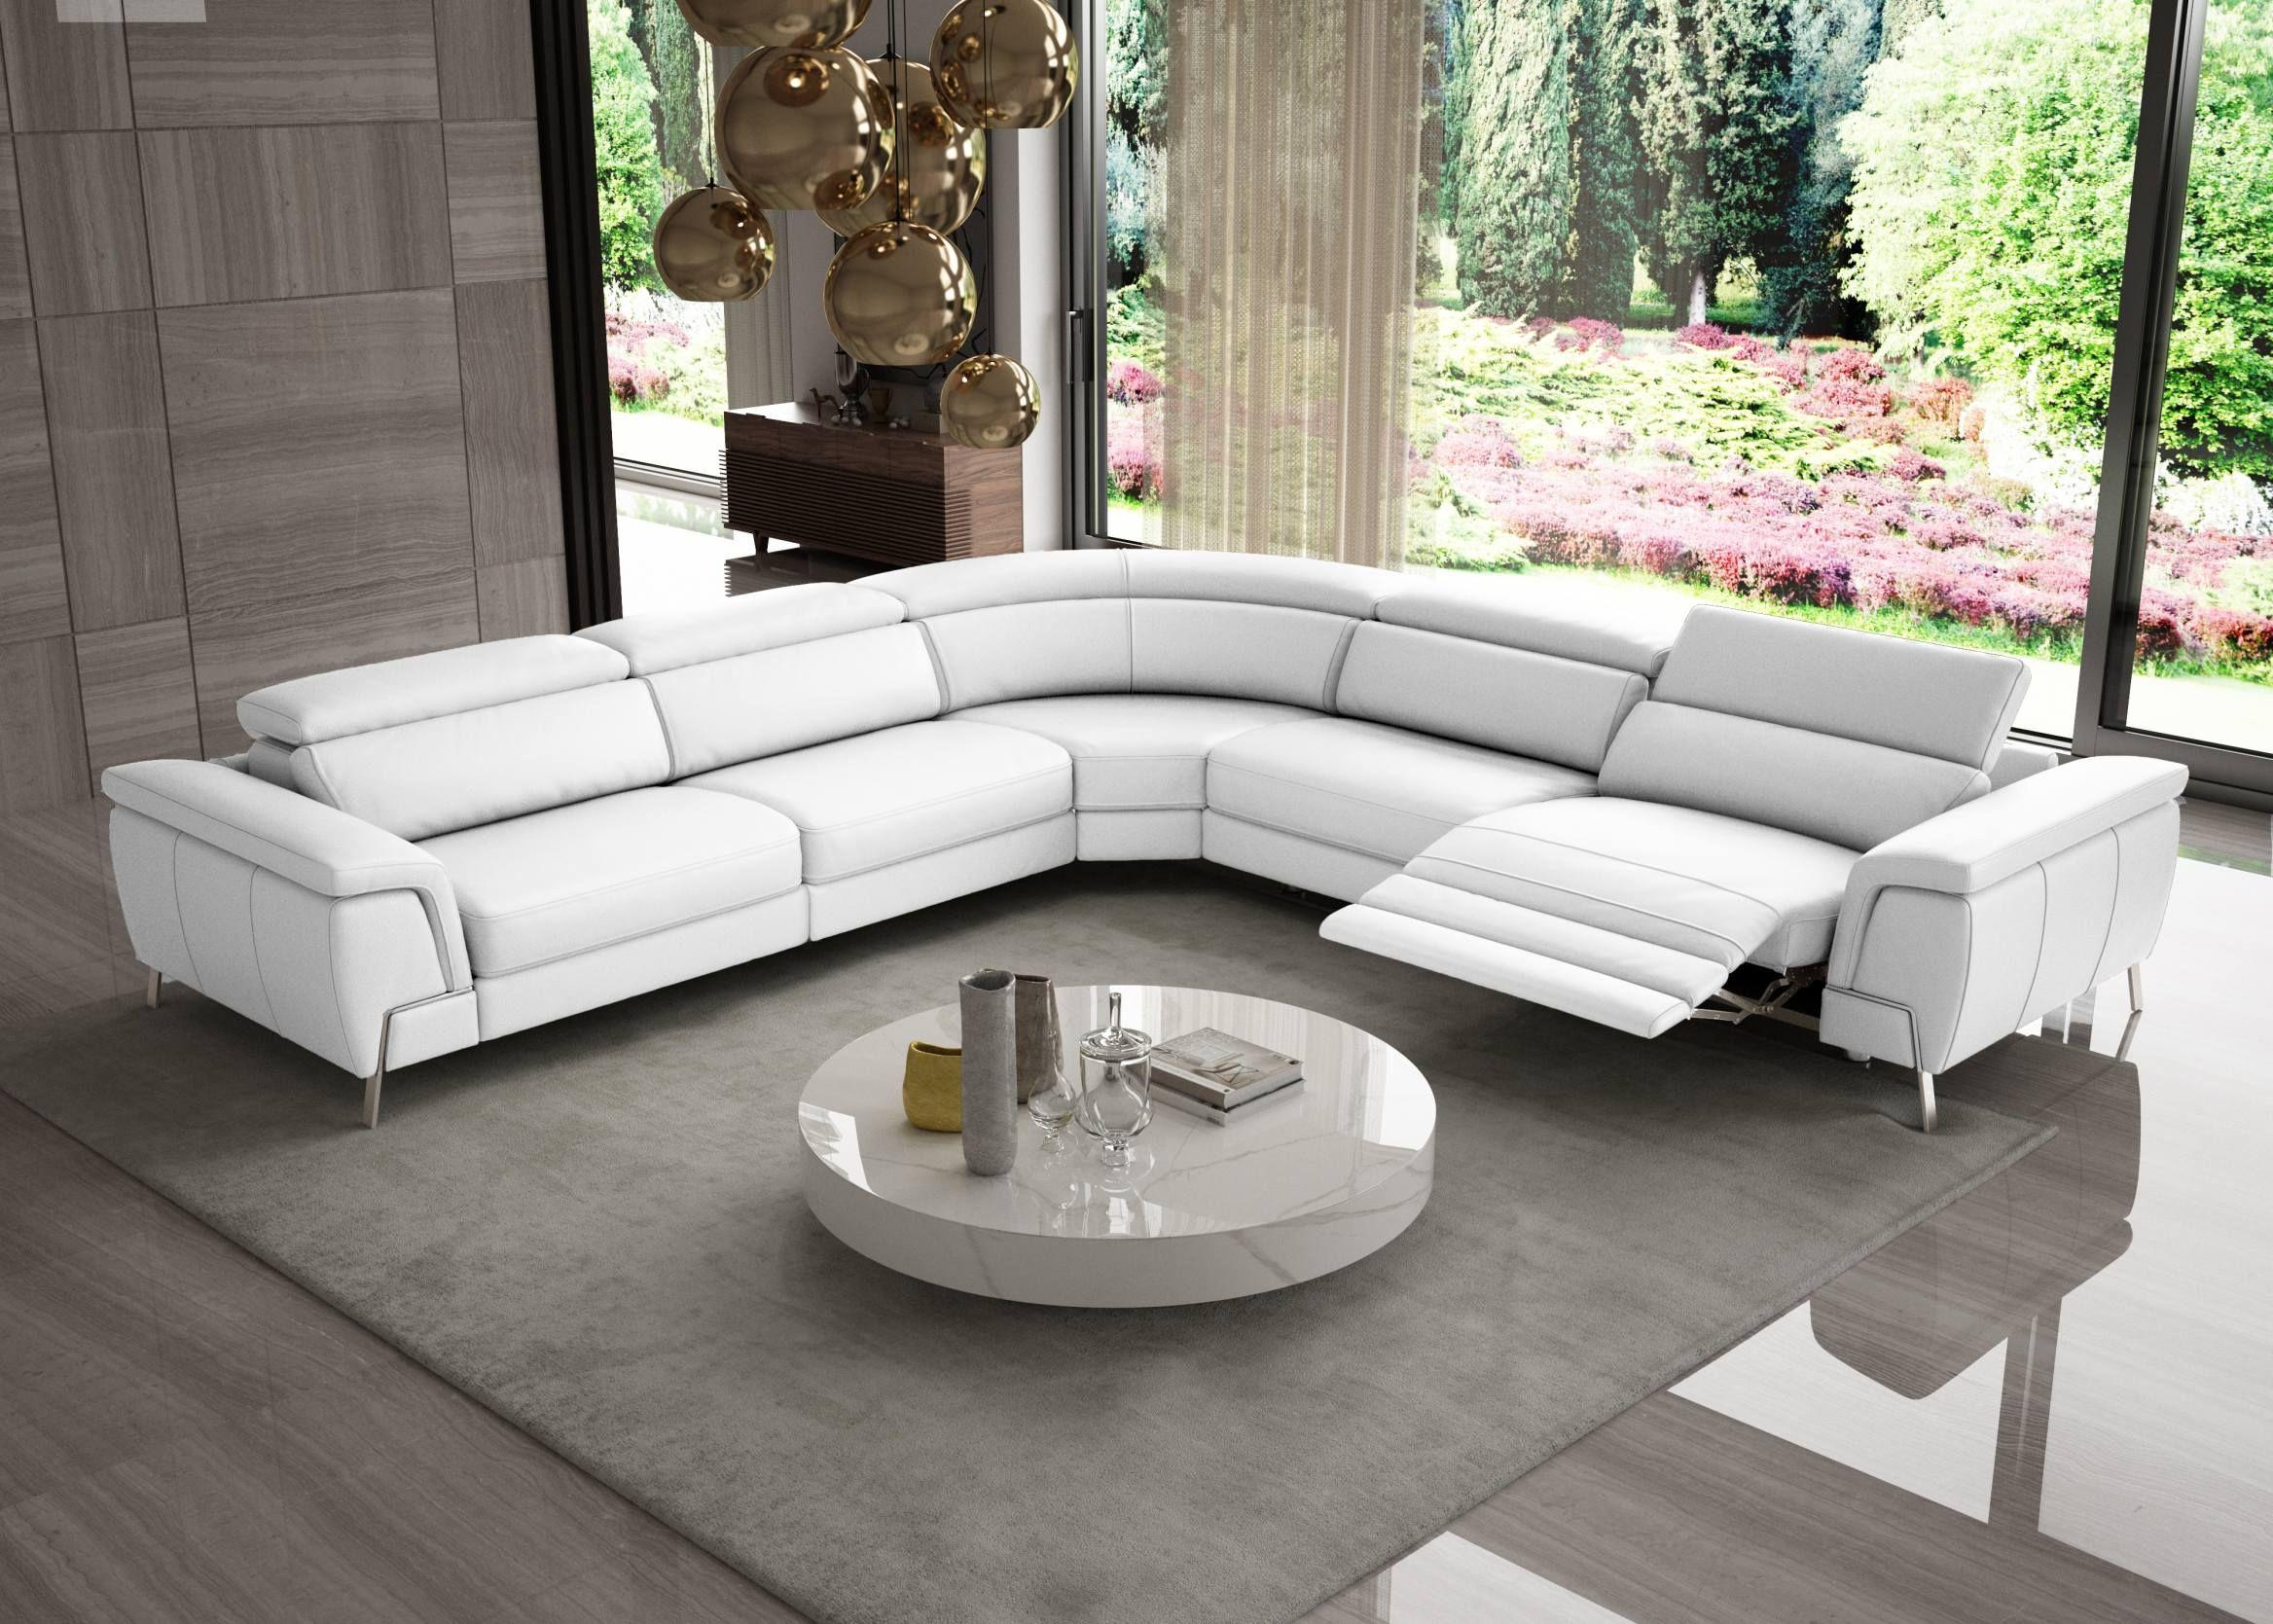 Contemporary, Modern Sectional Recliner VGCCWONDER-WHT-SECT VGCCWONDER-WHT-SECT in White Italian Leather